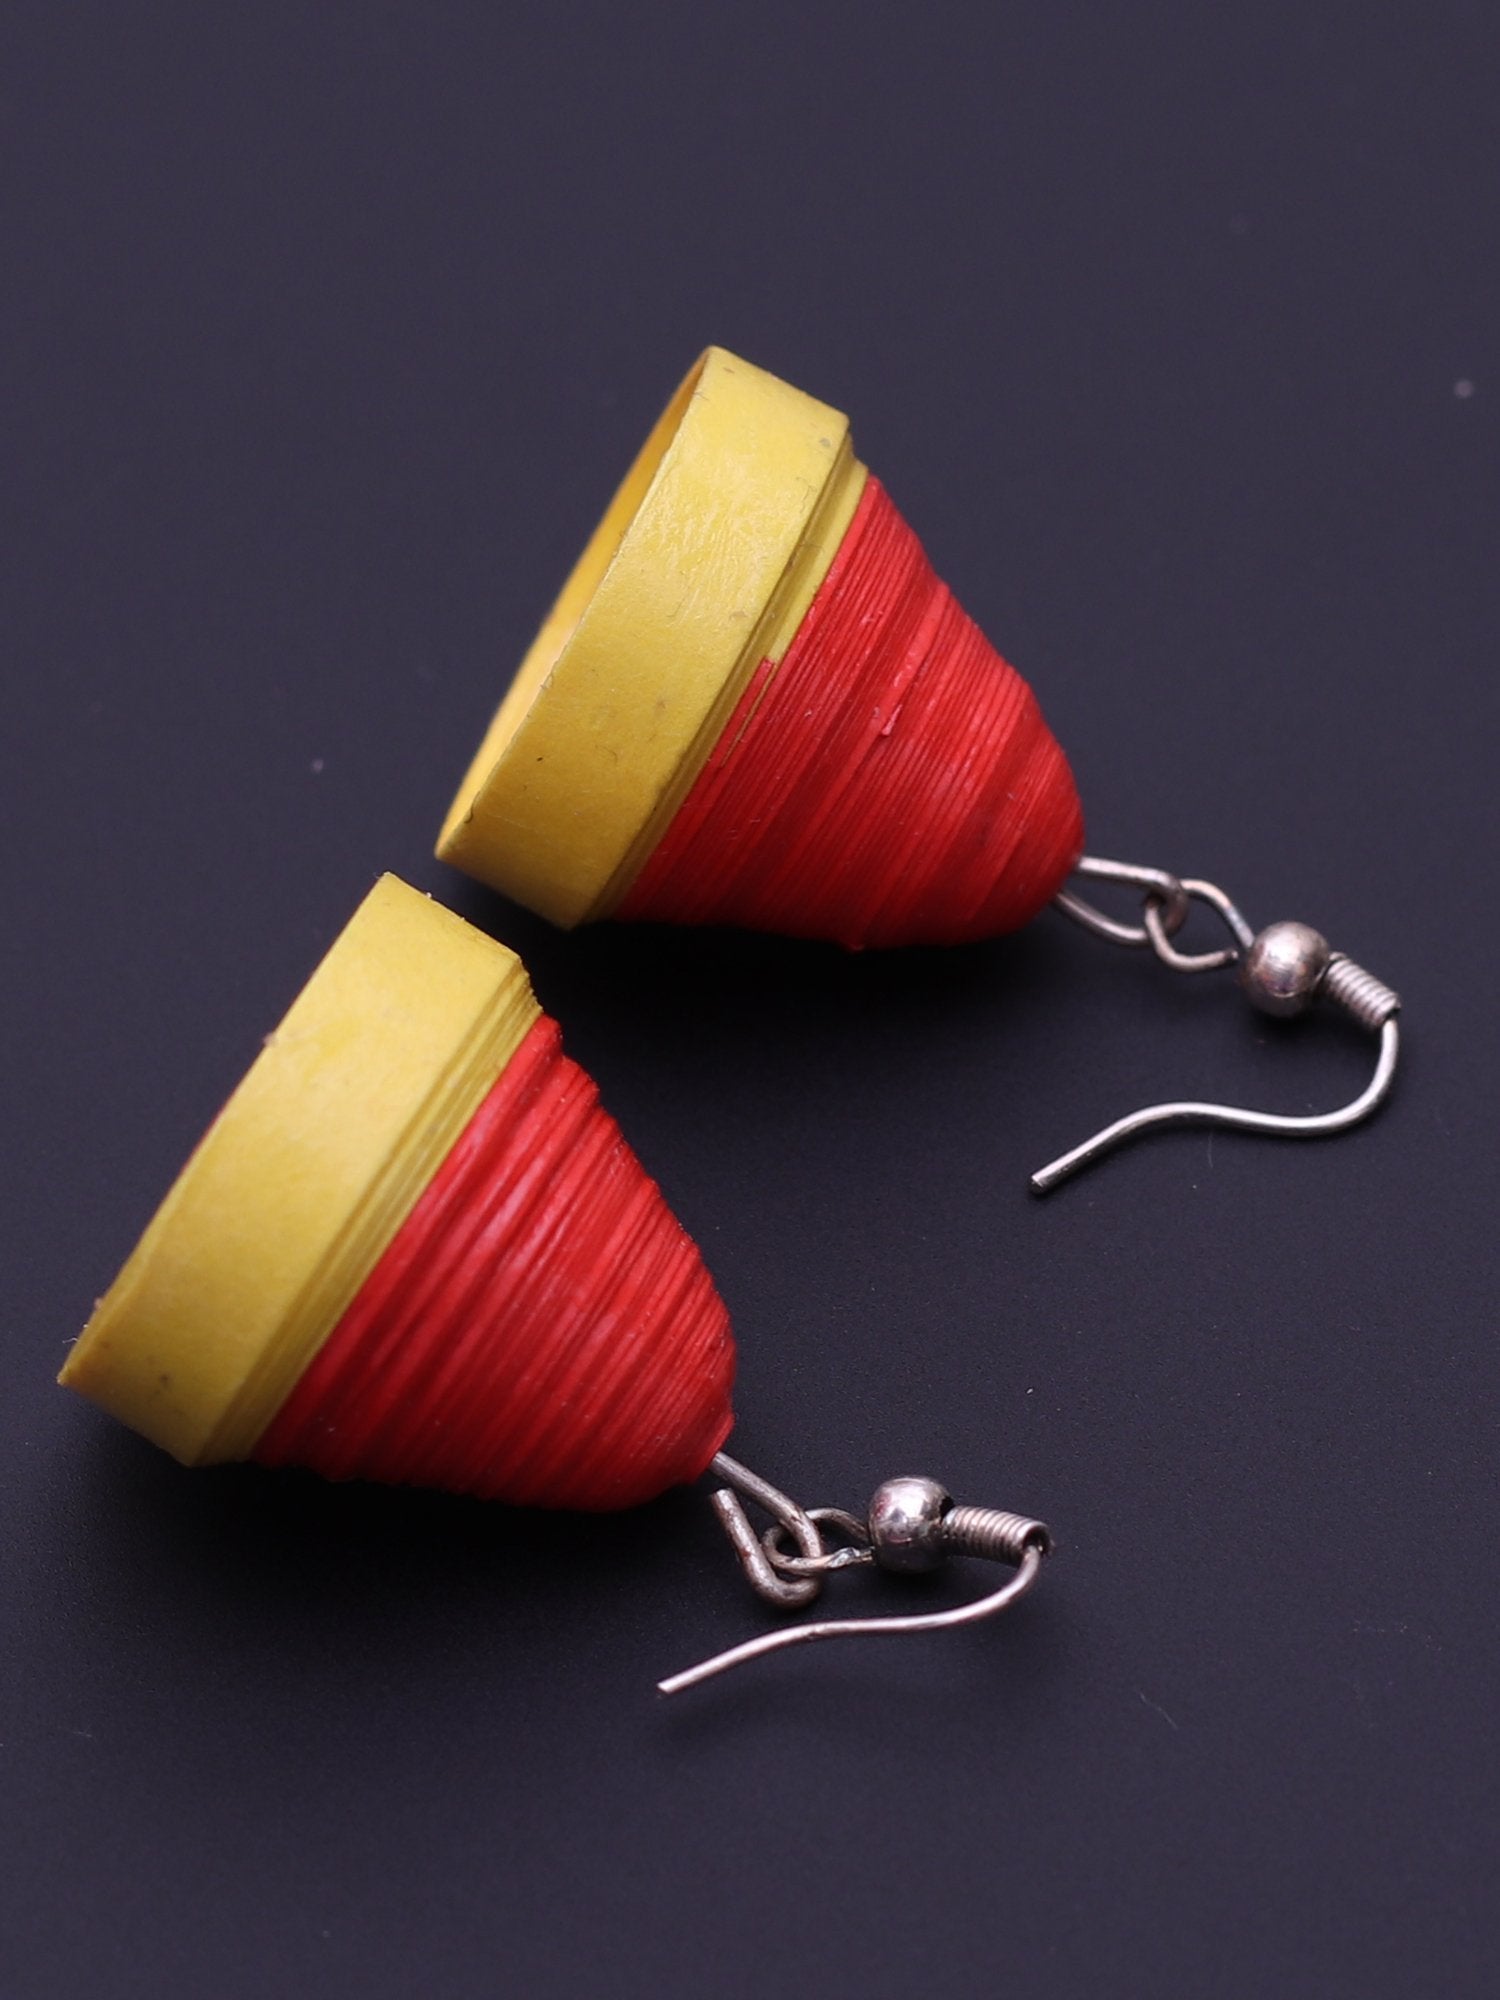 Red Yellow Dome Shaped Earrings - A Local Tribe